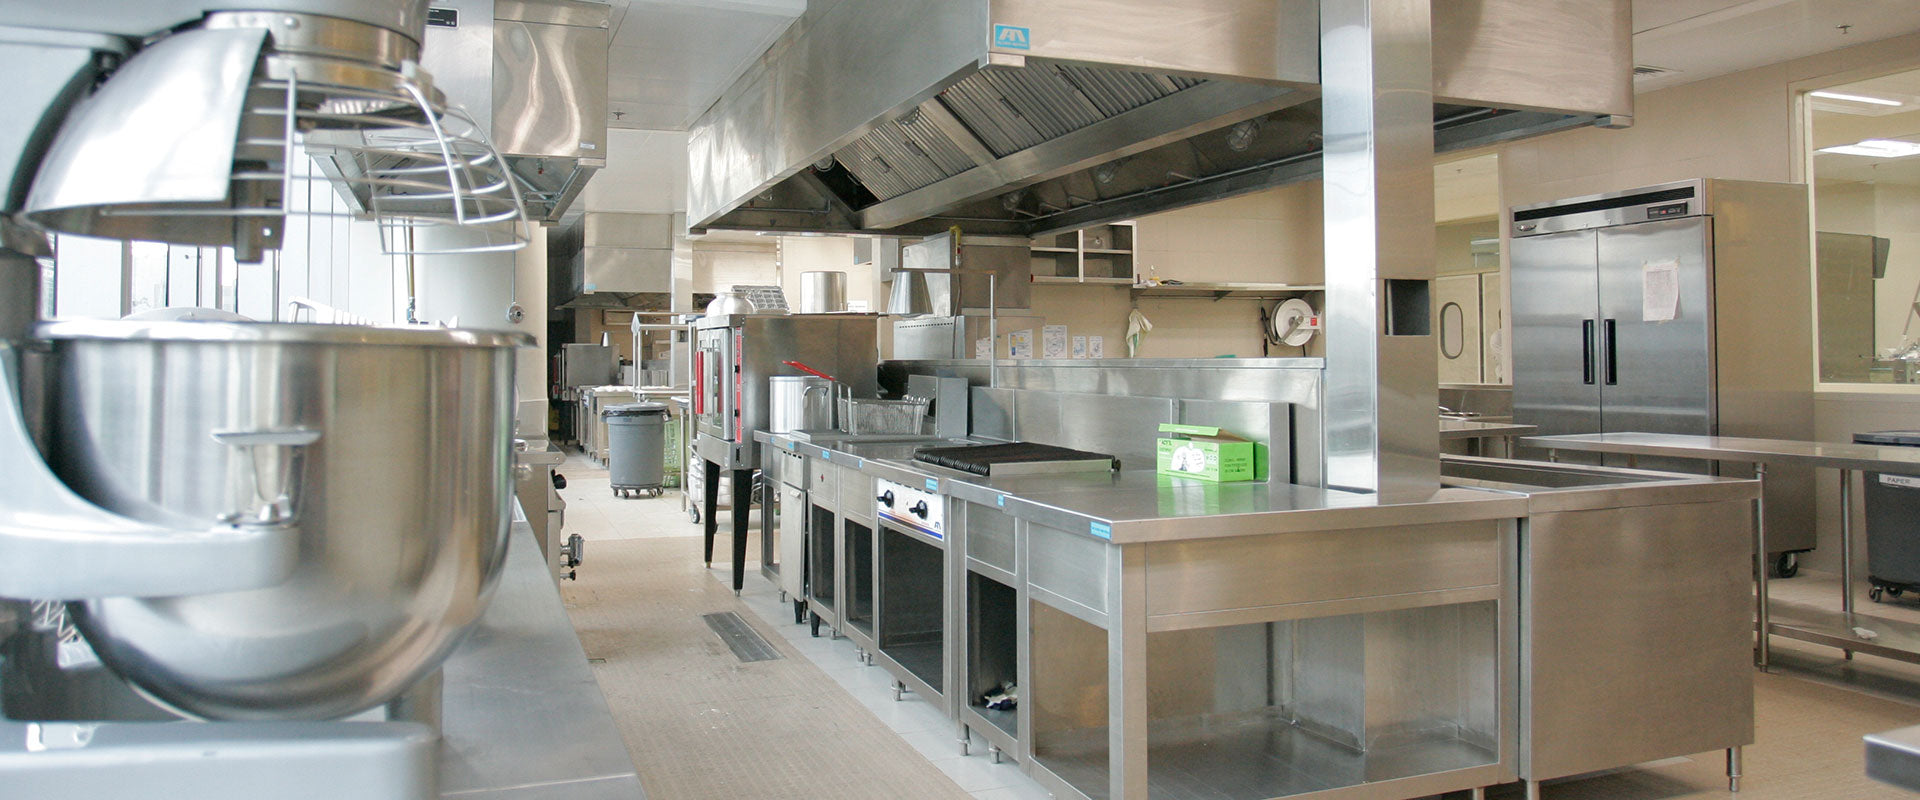 food safe commercial kitchen environment